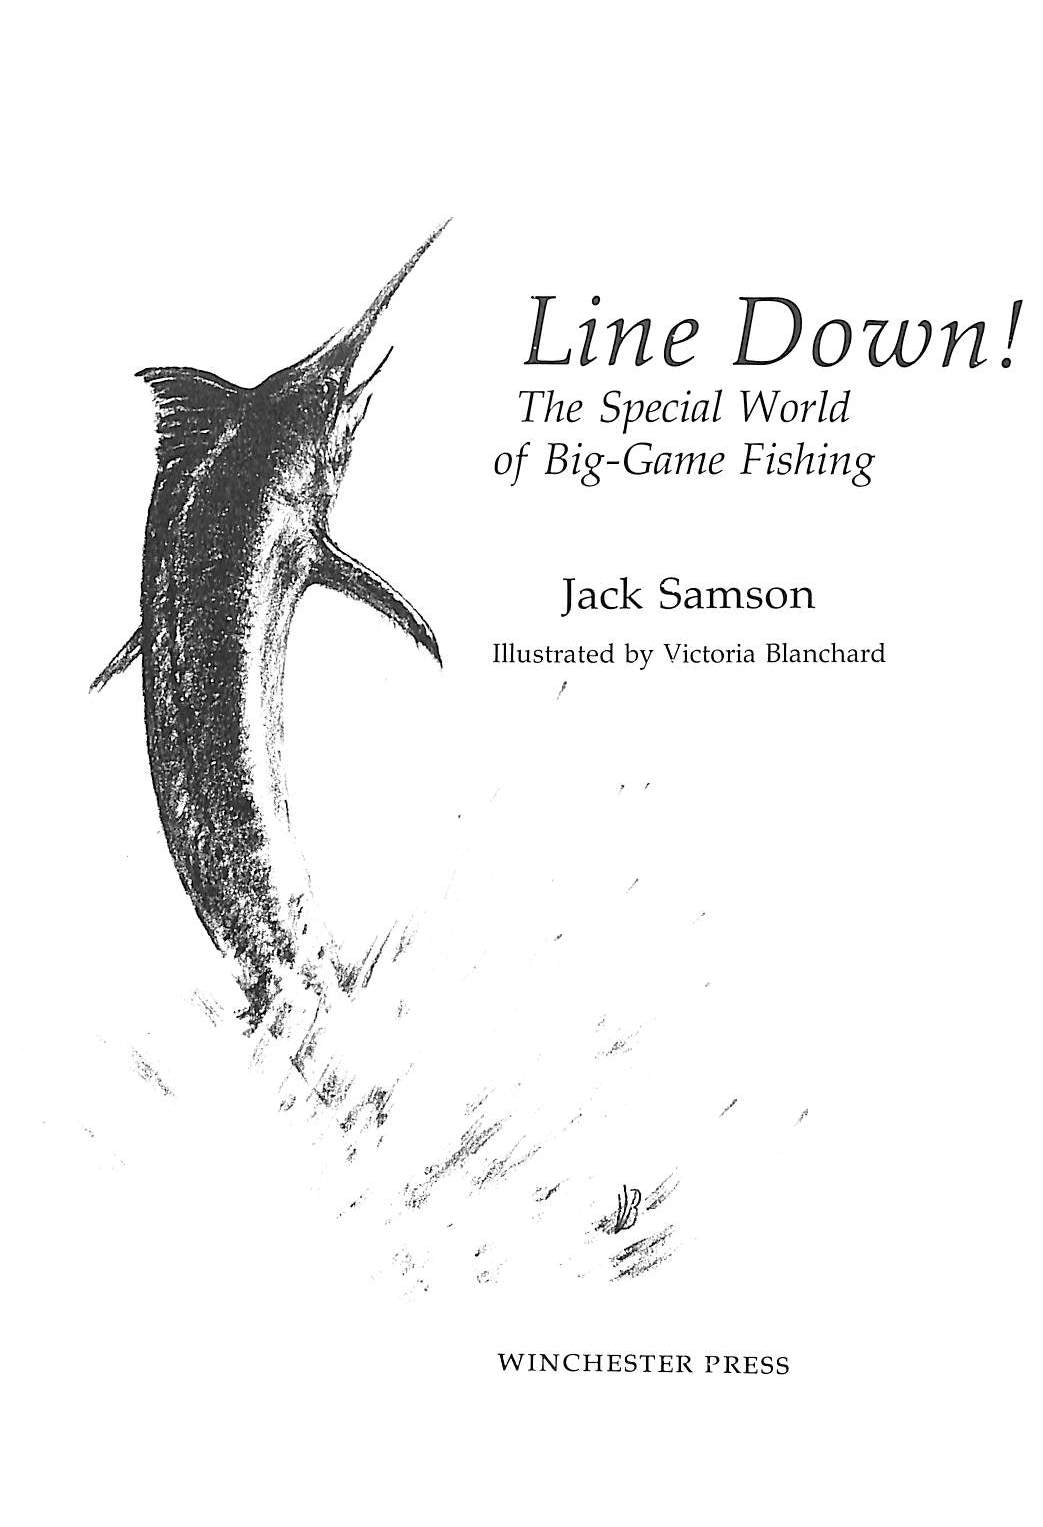 Line Down! (The Special World Of Big-Game Fishing) 1973 SAMSON, Jack